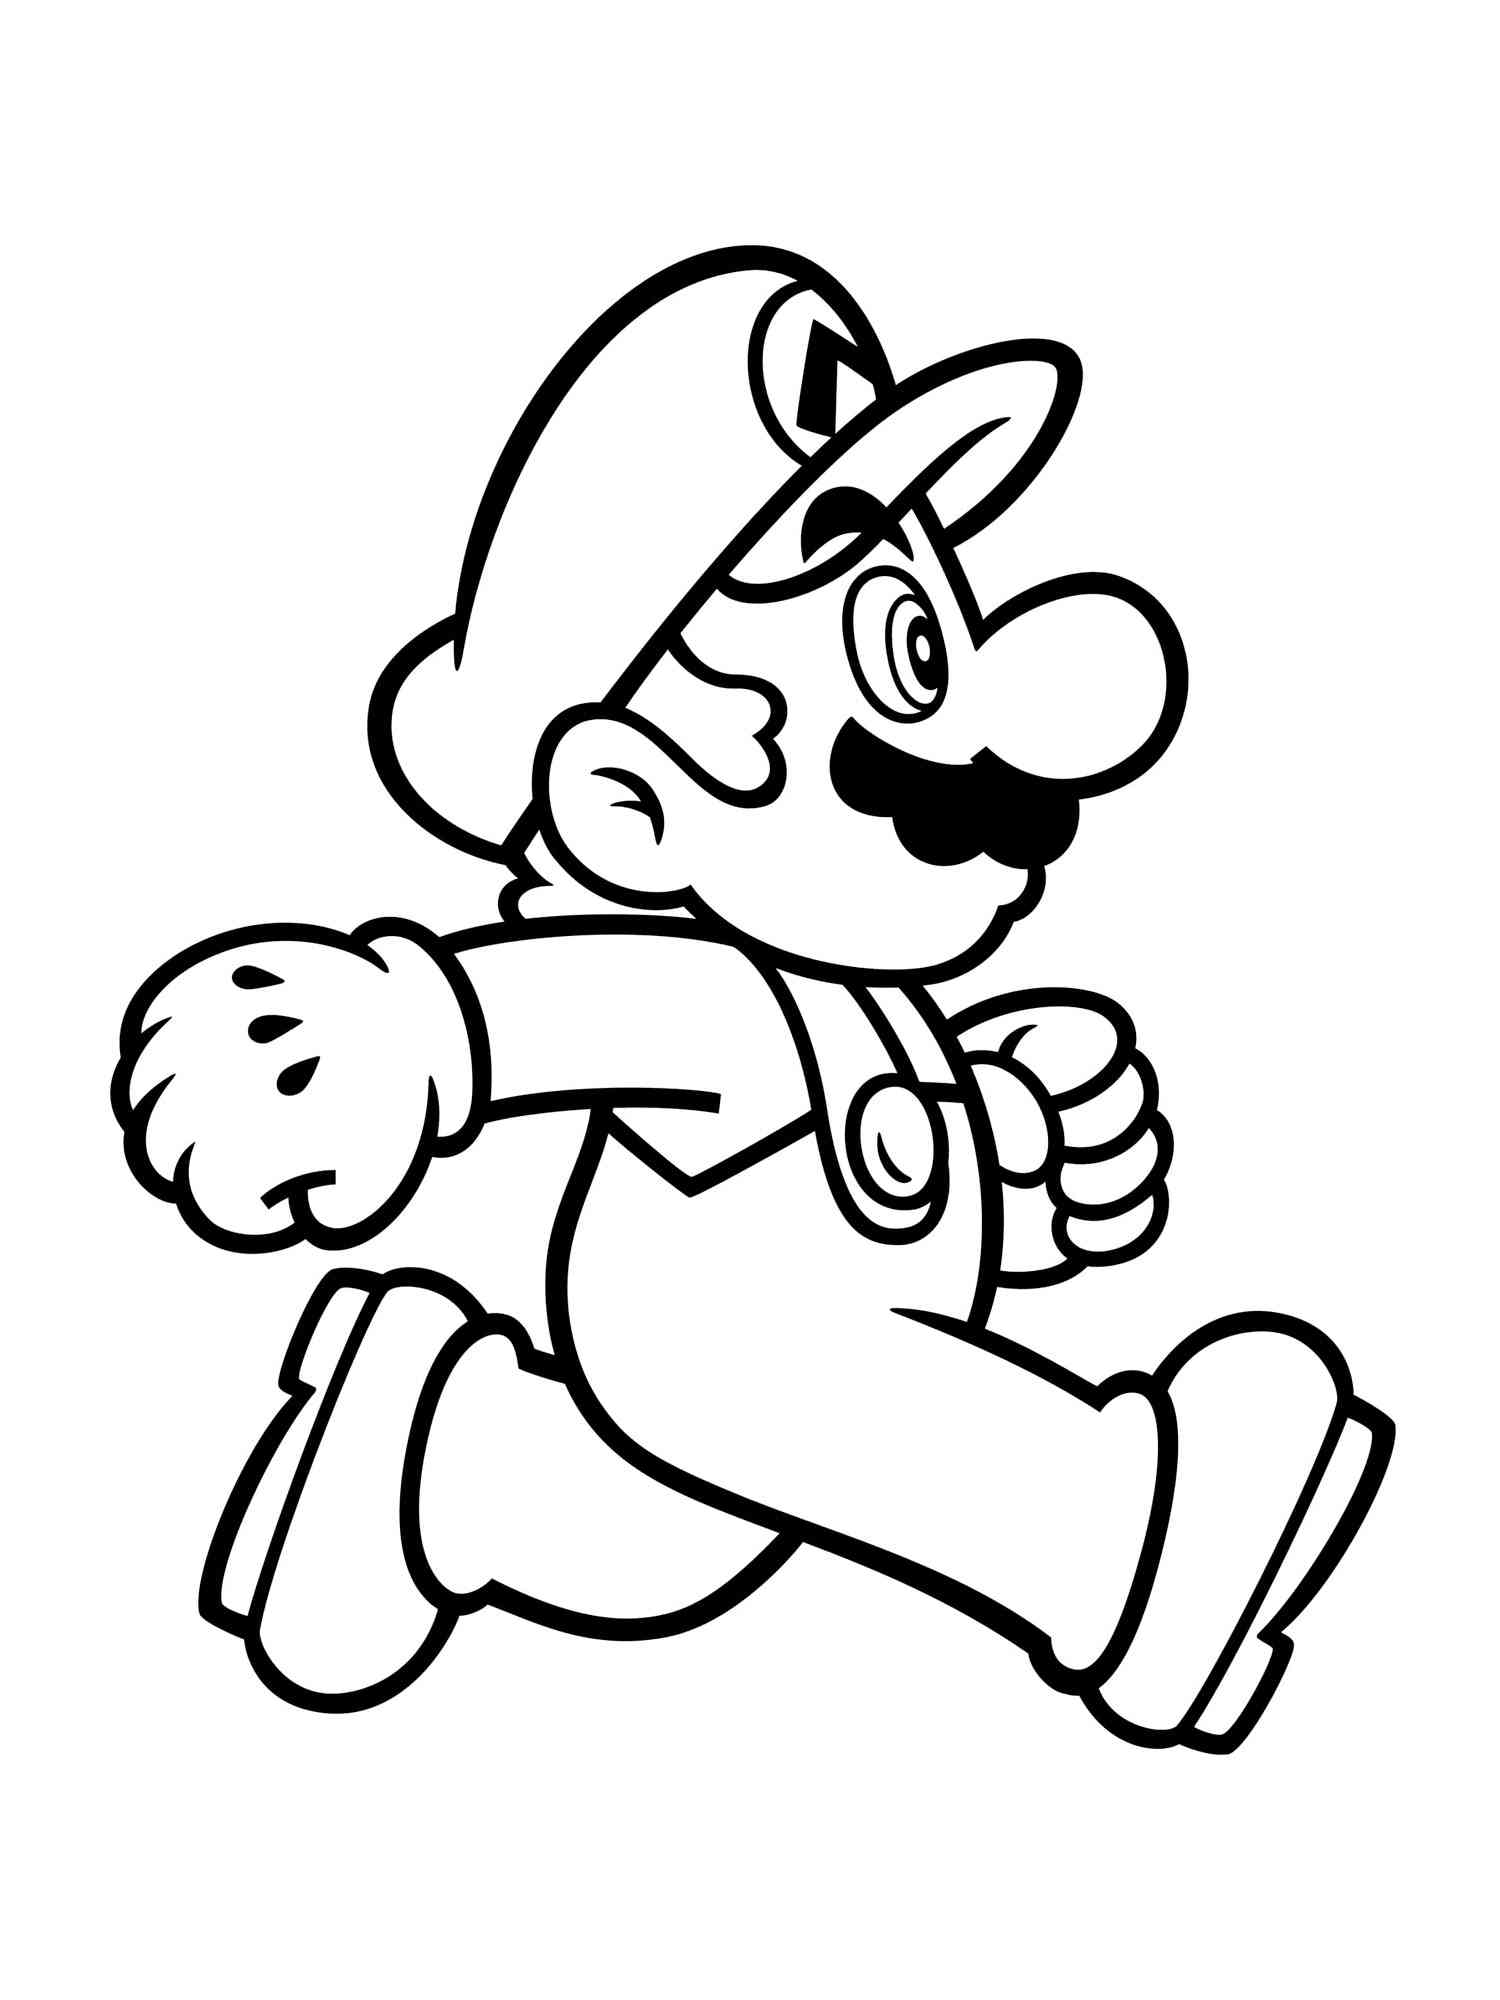 Running Mario coloring page